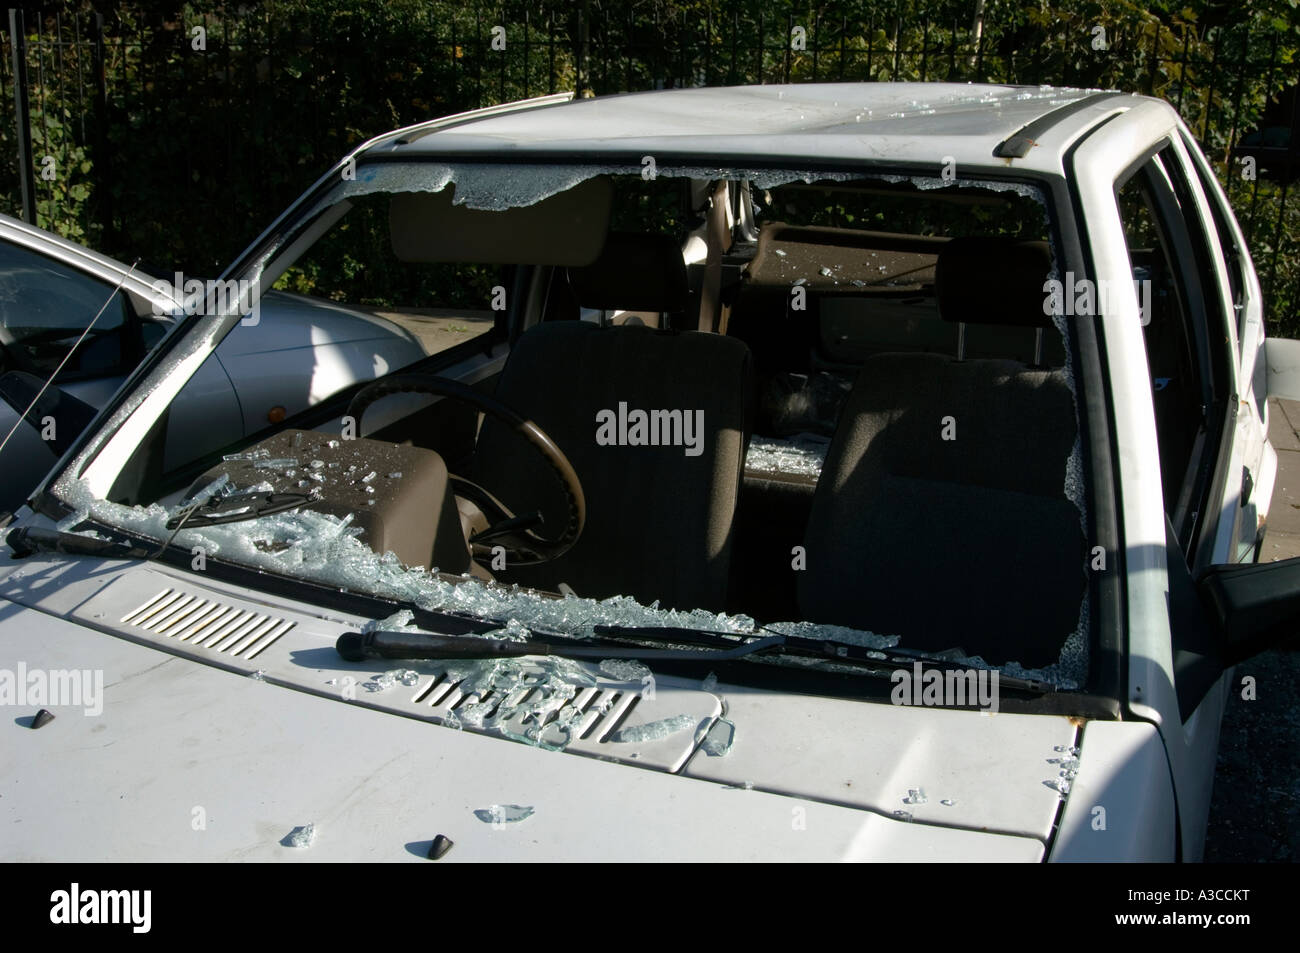 old white car wrecked and broken into with window smashed london england uk Stock Photo